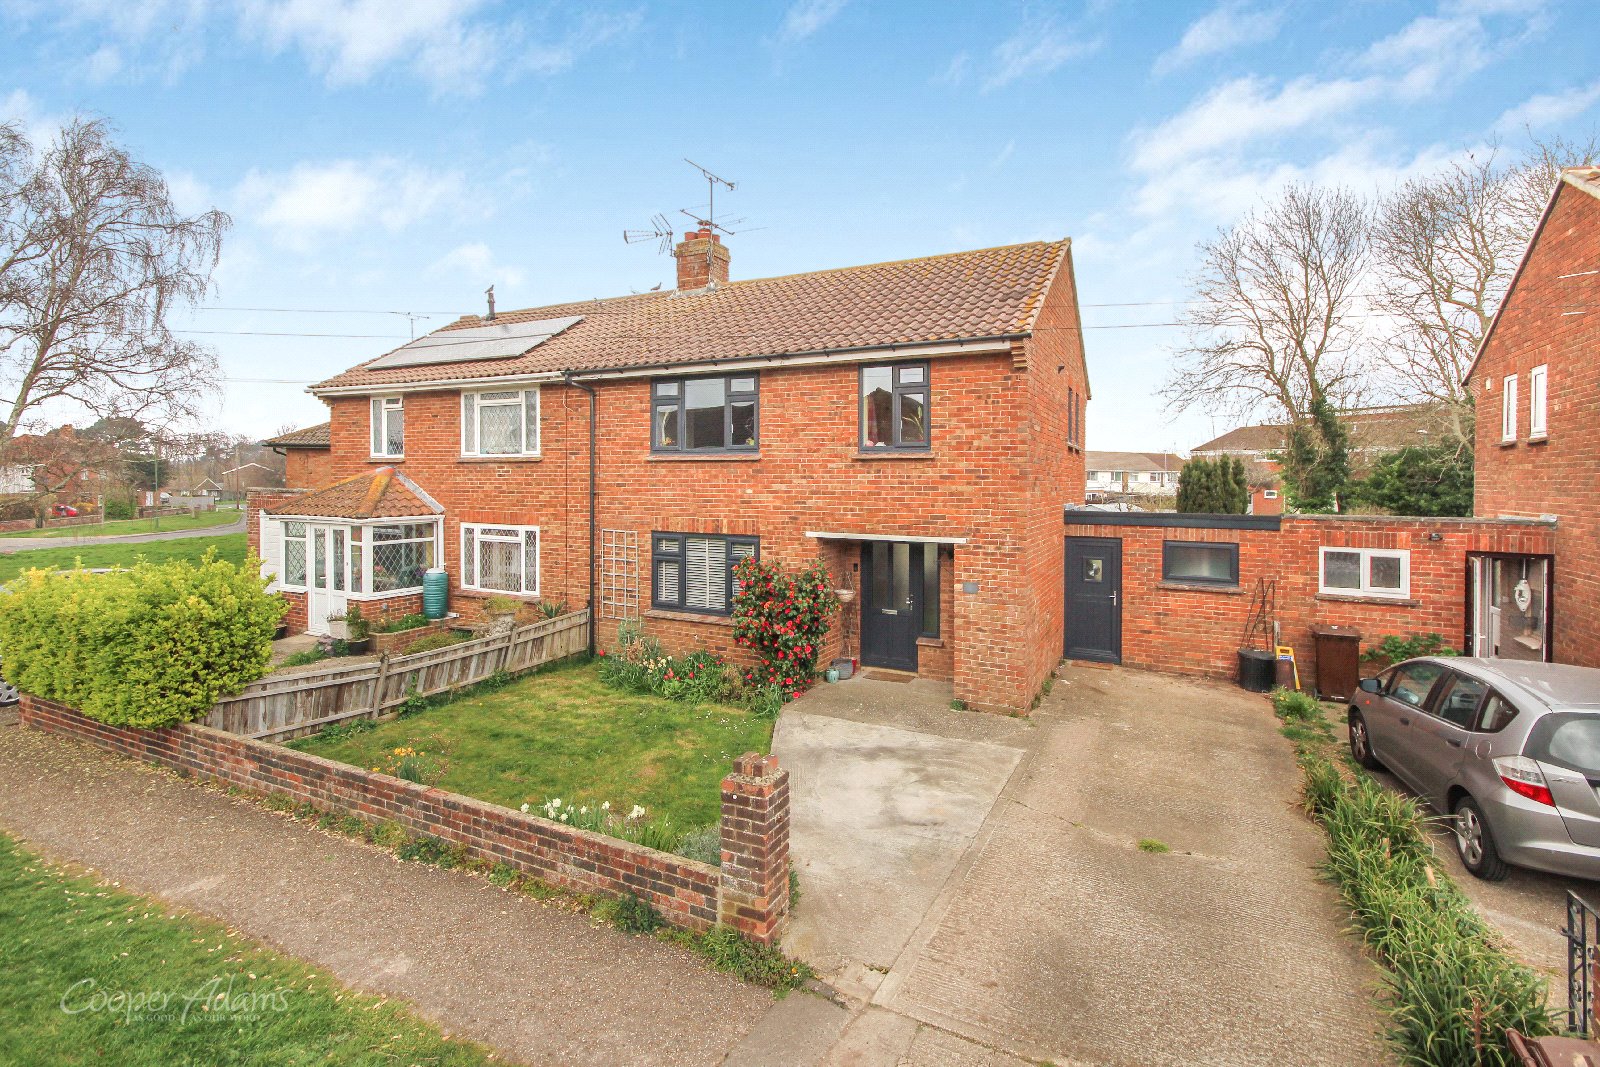 3 bed house for sale in Eastcourt Way, Rustington, BN16